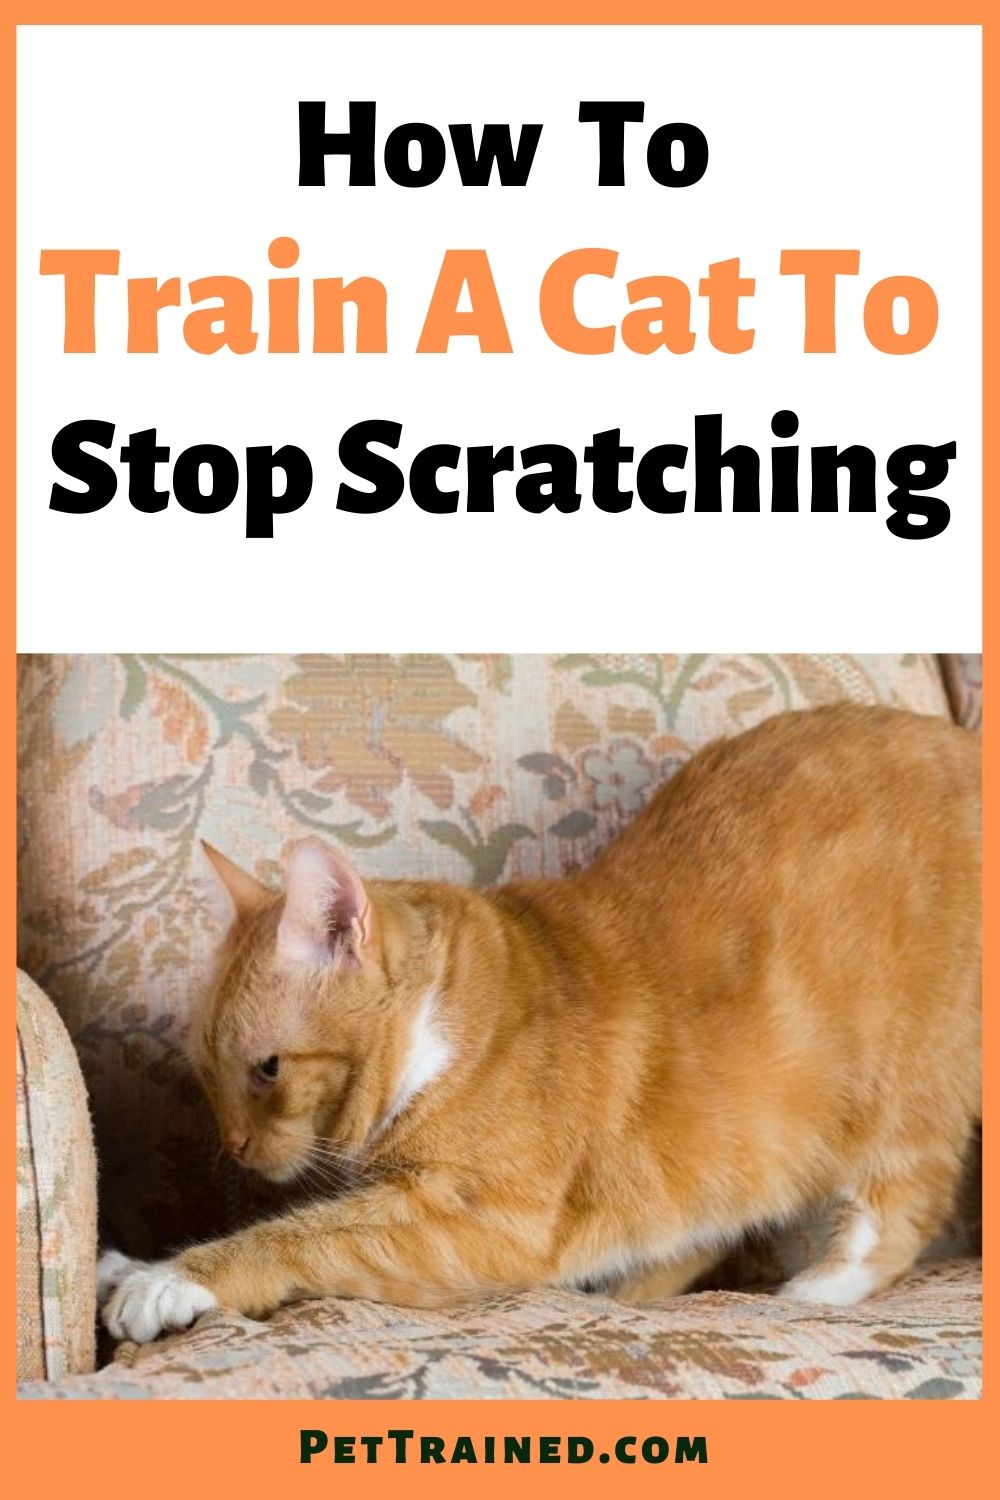 How to train a cat to stop scratching easily